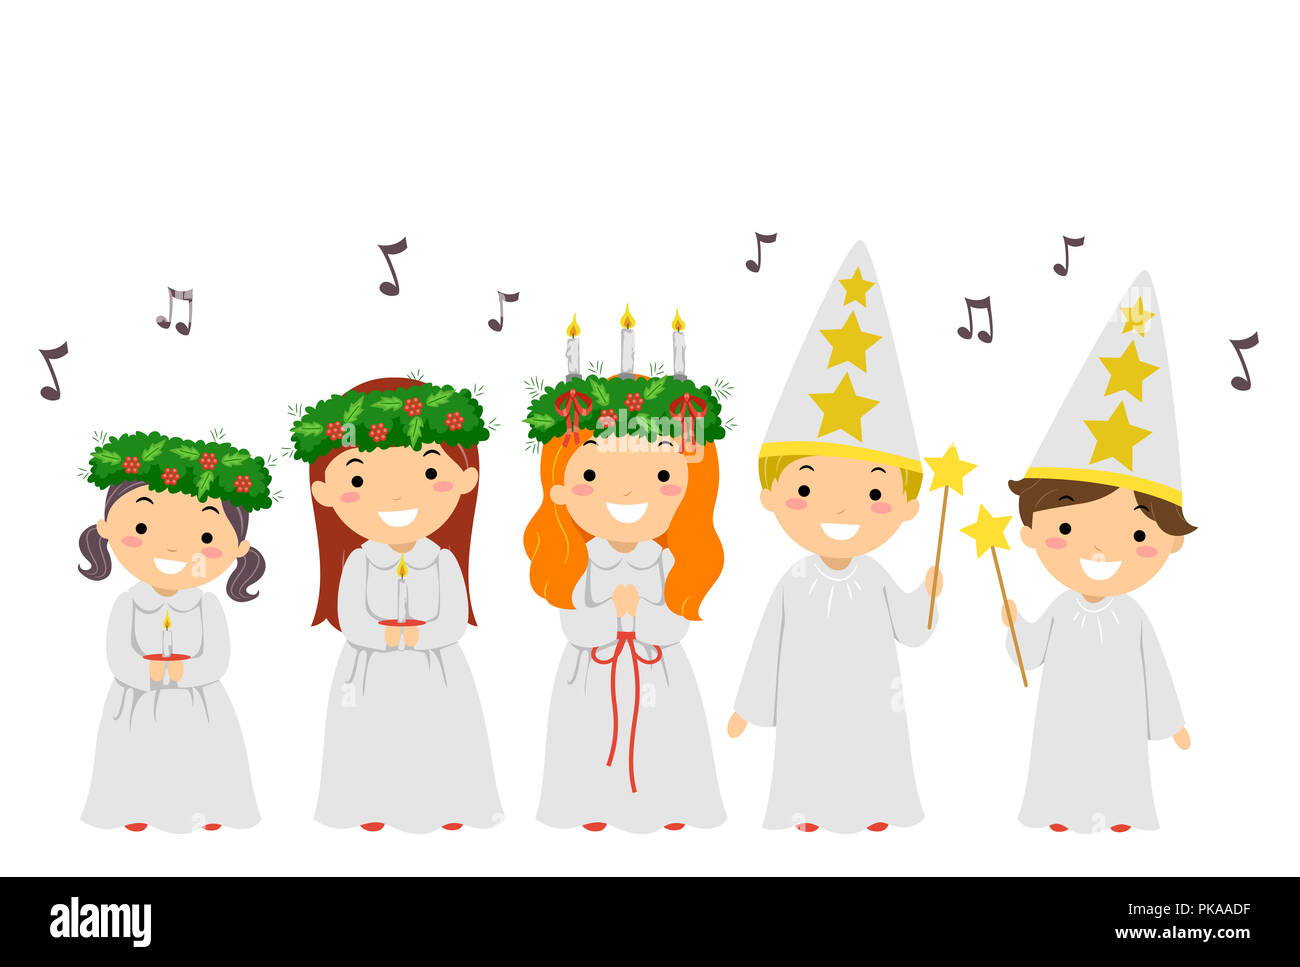 Illustration of Stickman Kids Singing Carols During the Feast Day of Saint Lucy Stock Photo